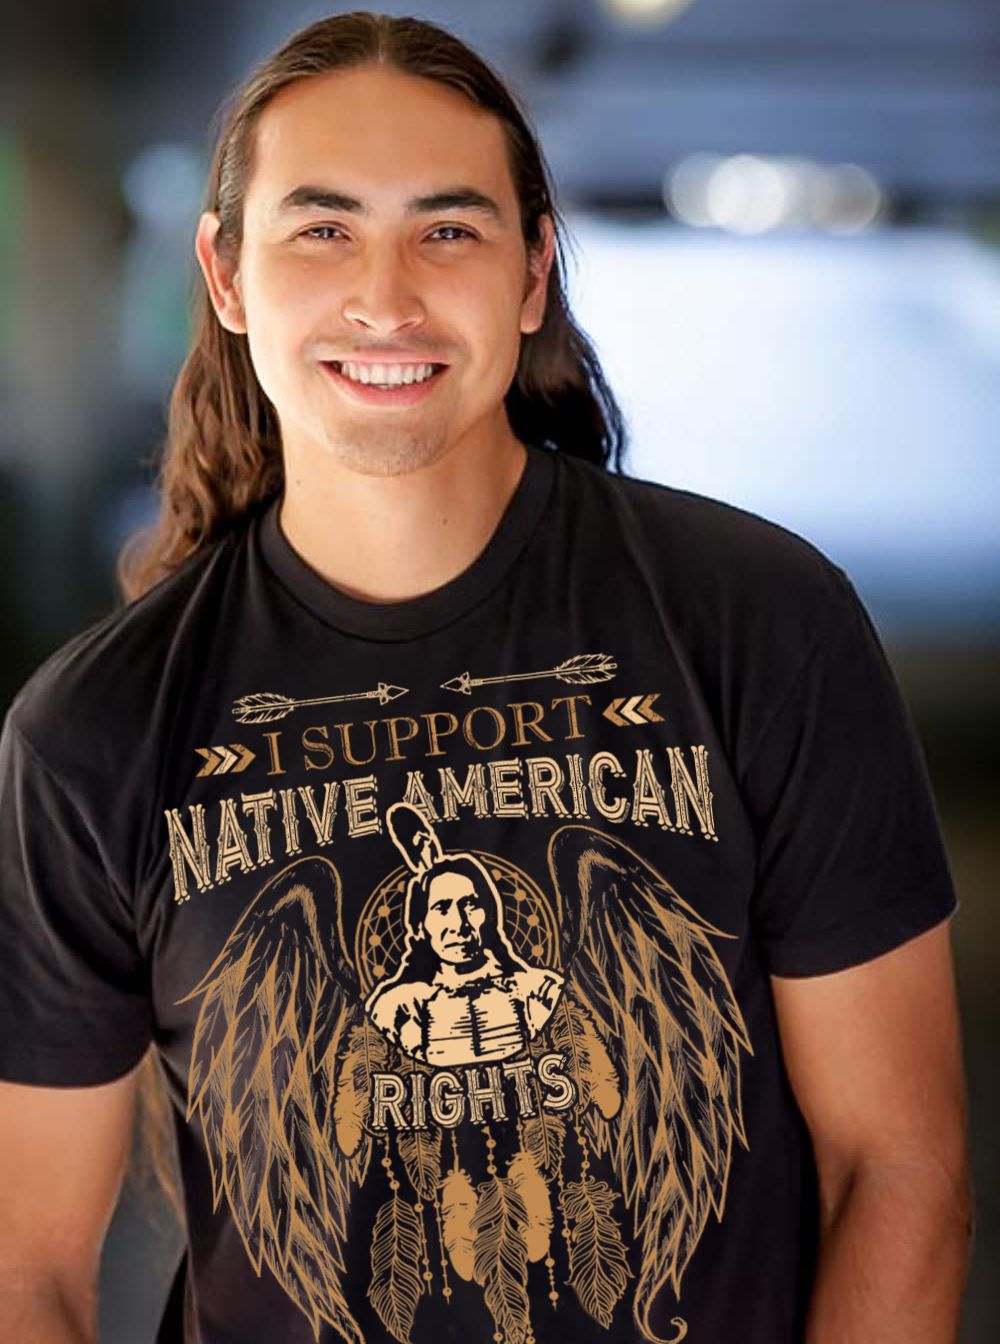 I support native american rights